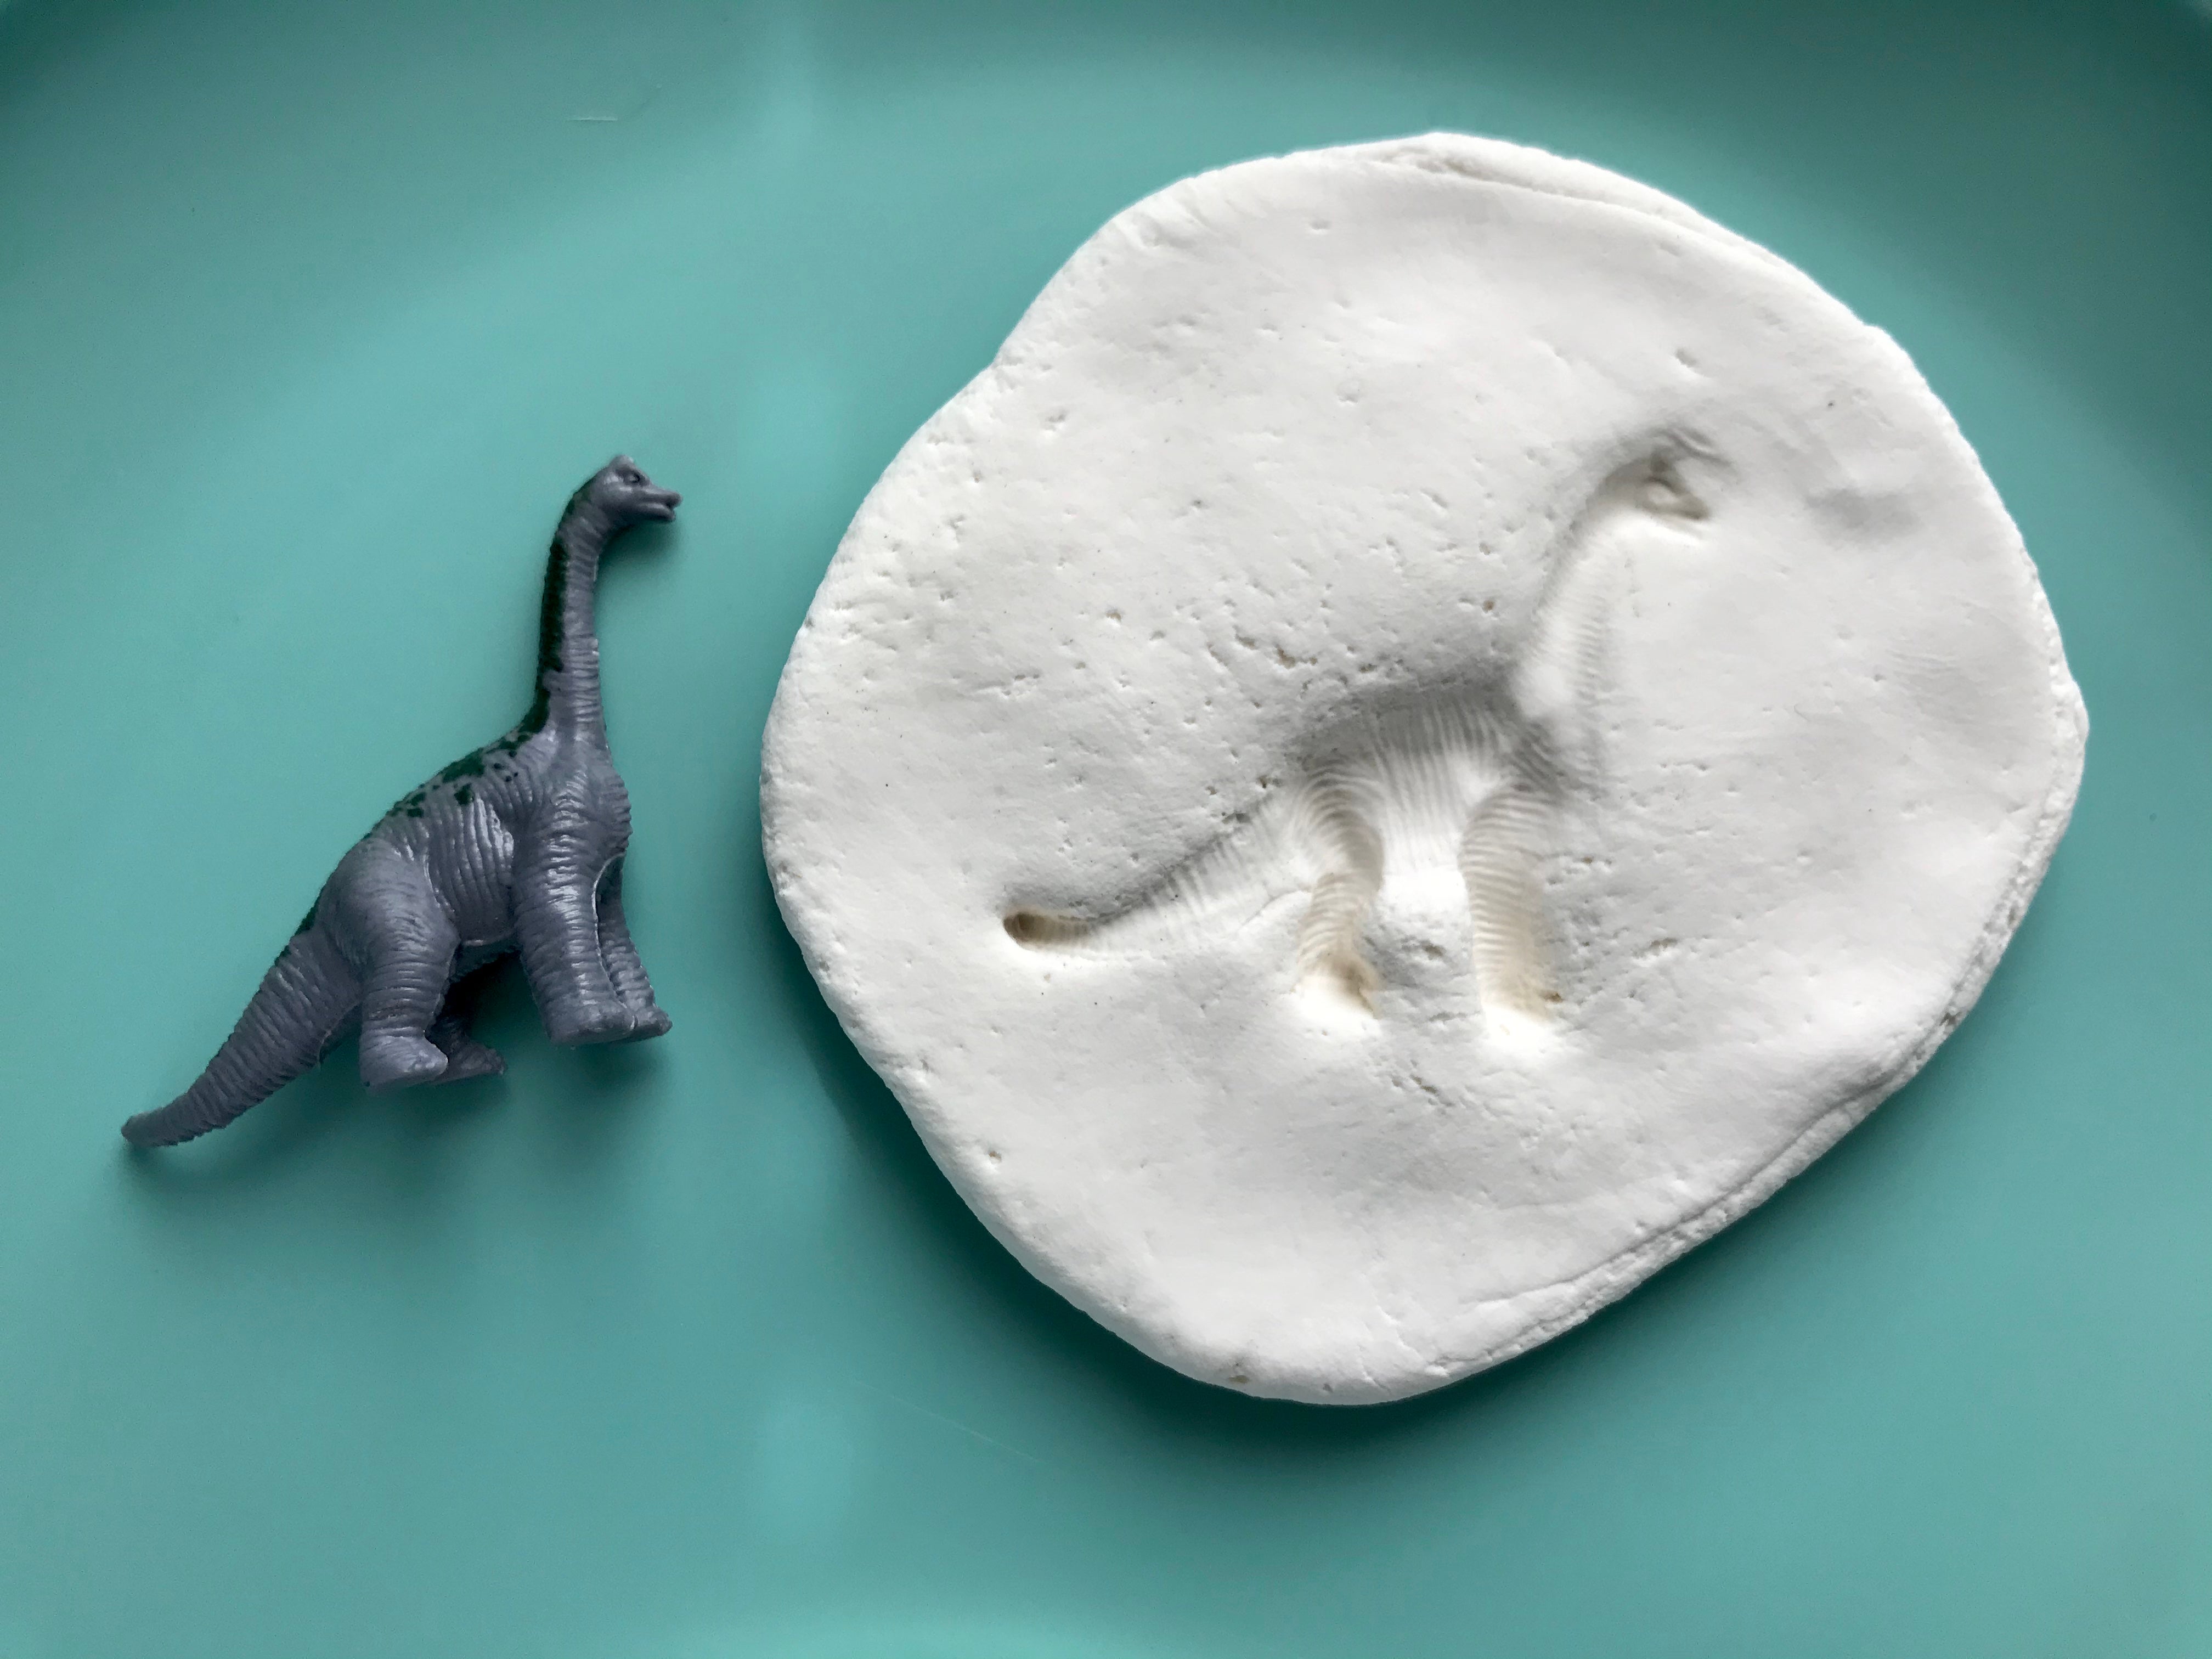 A small dinosaur toy and a piece of clay in which the toy has been pressed to create an impression.